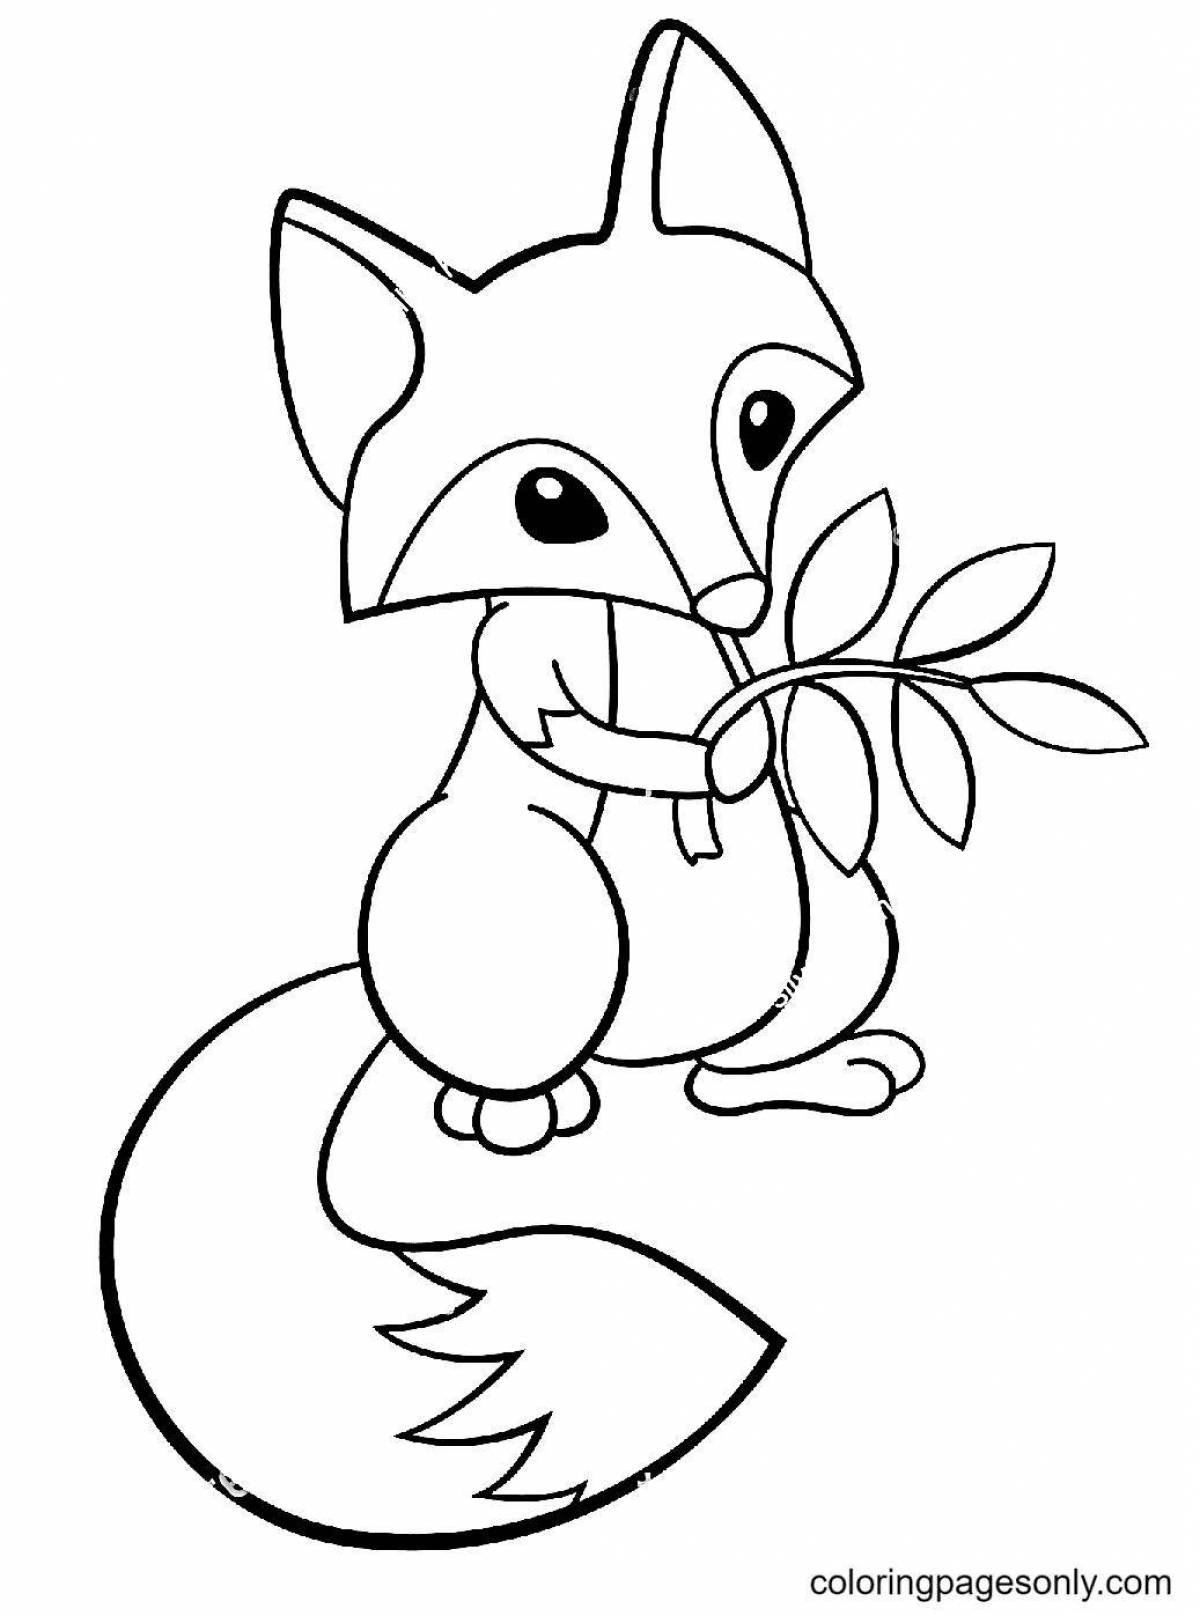 Fancy fox coloring book for 4-5 year olds